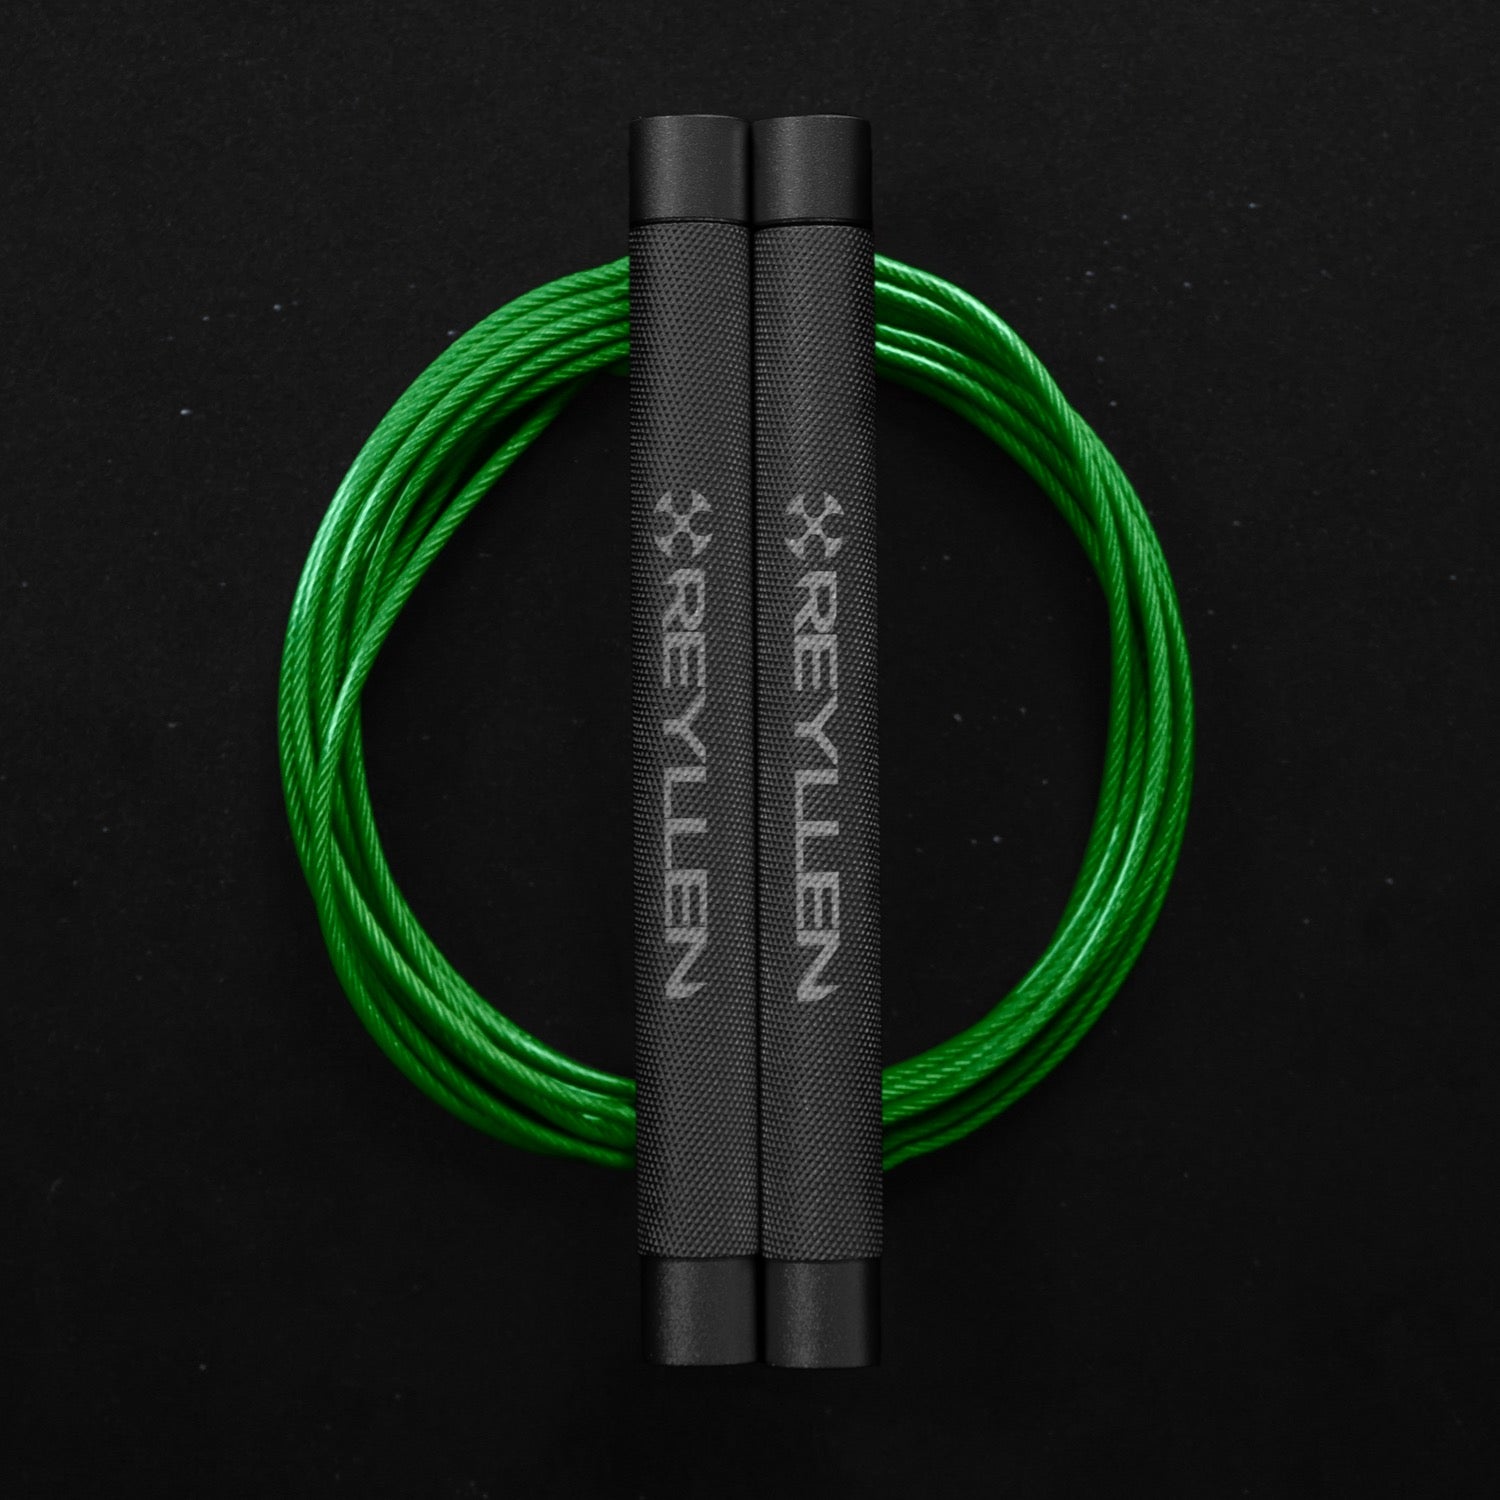 Reyllen Flare Mx Speed Skipping Jump Rope - Aluminium Handles - grey with green pvc cable